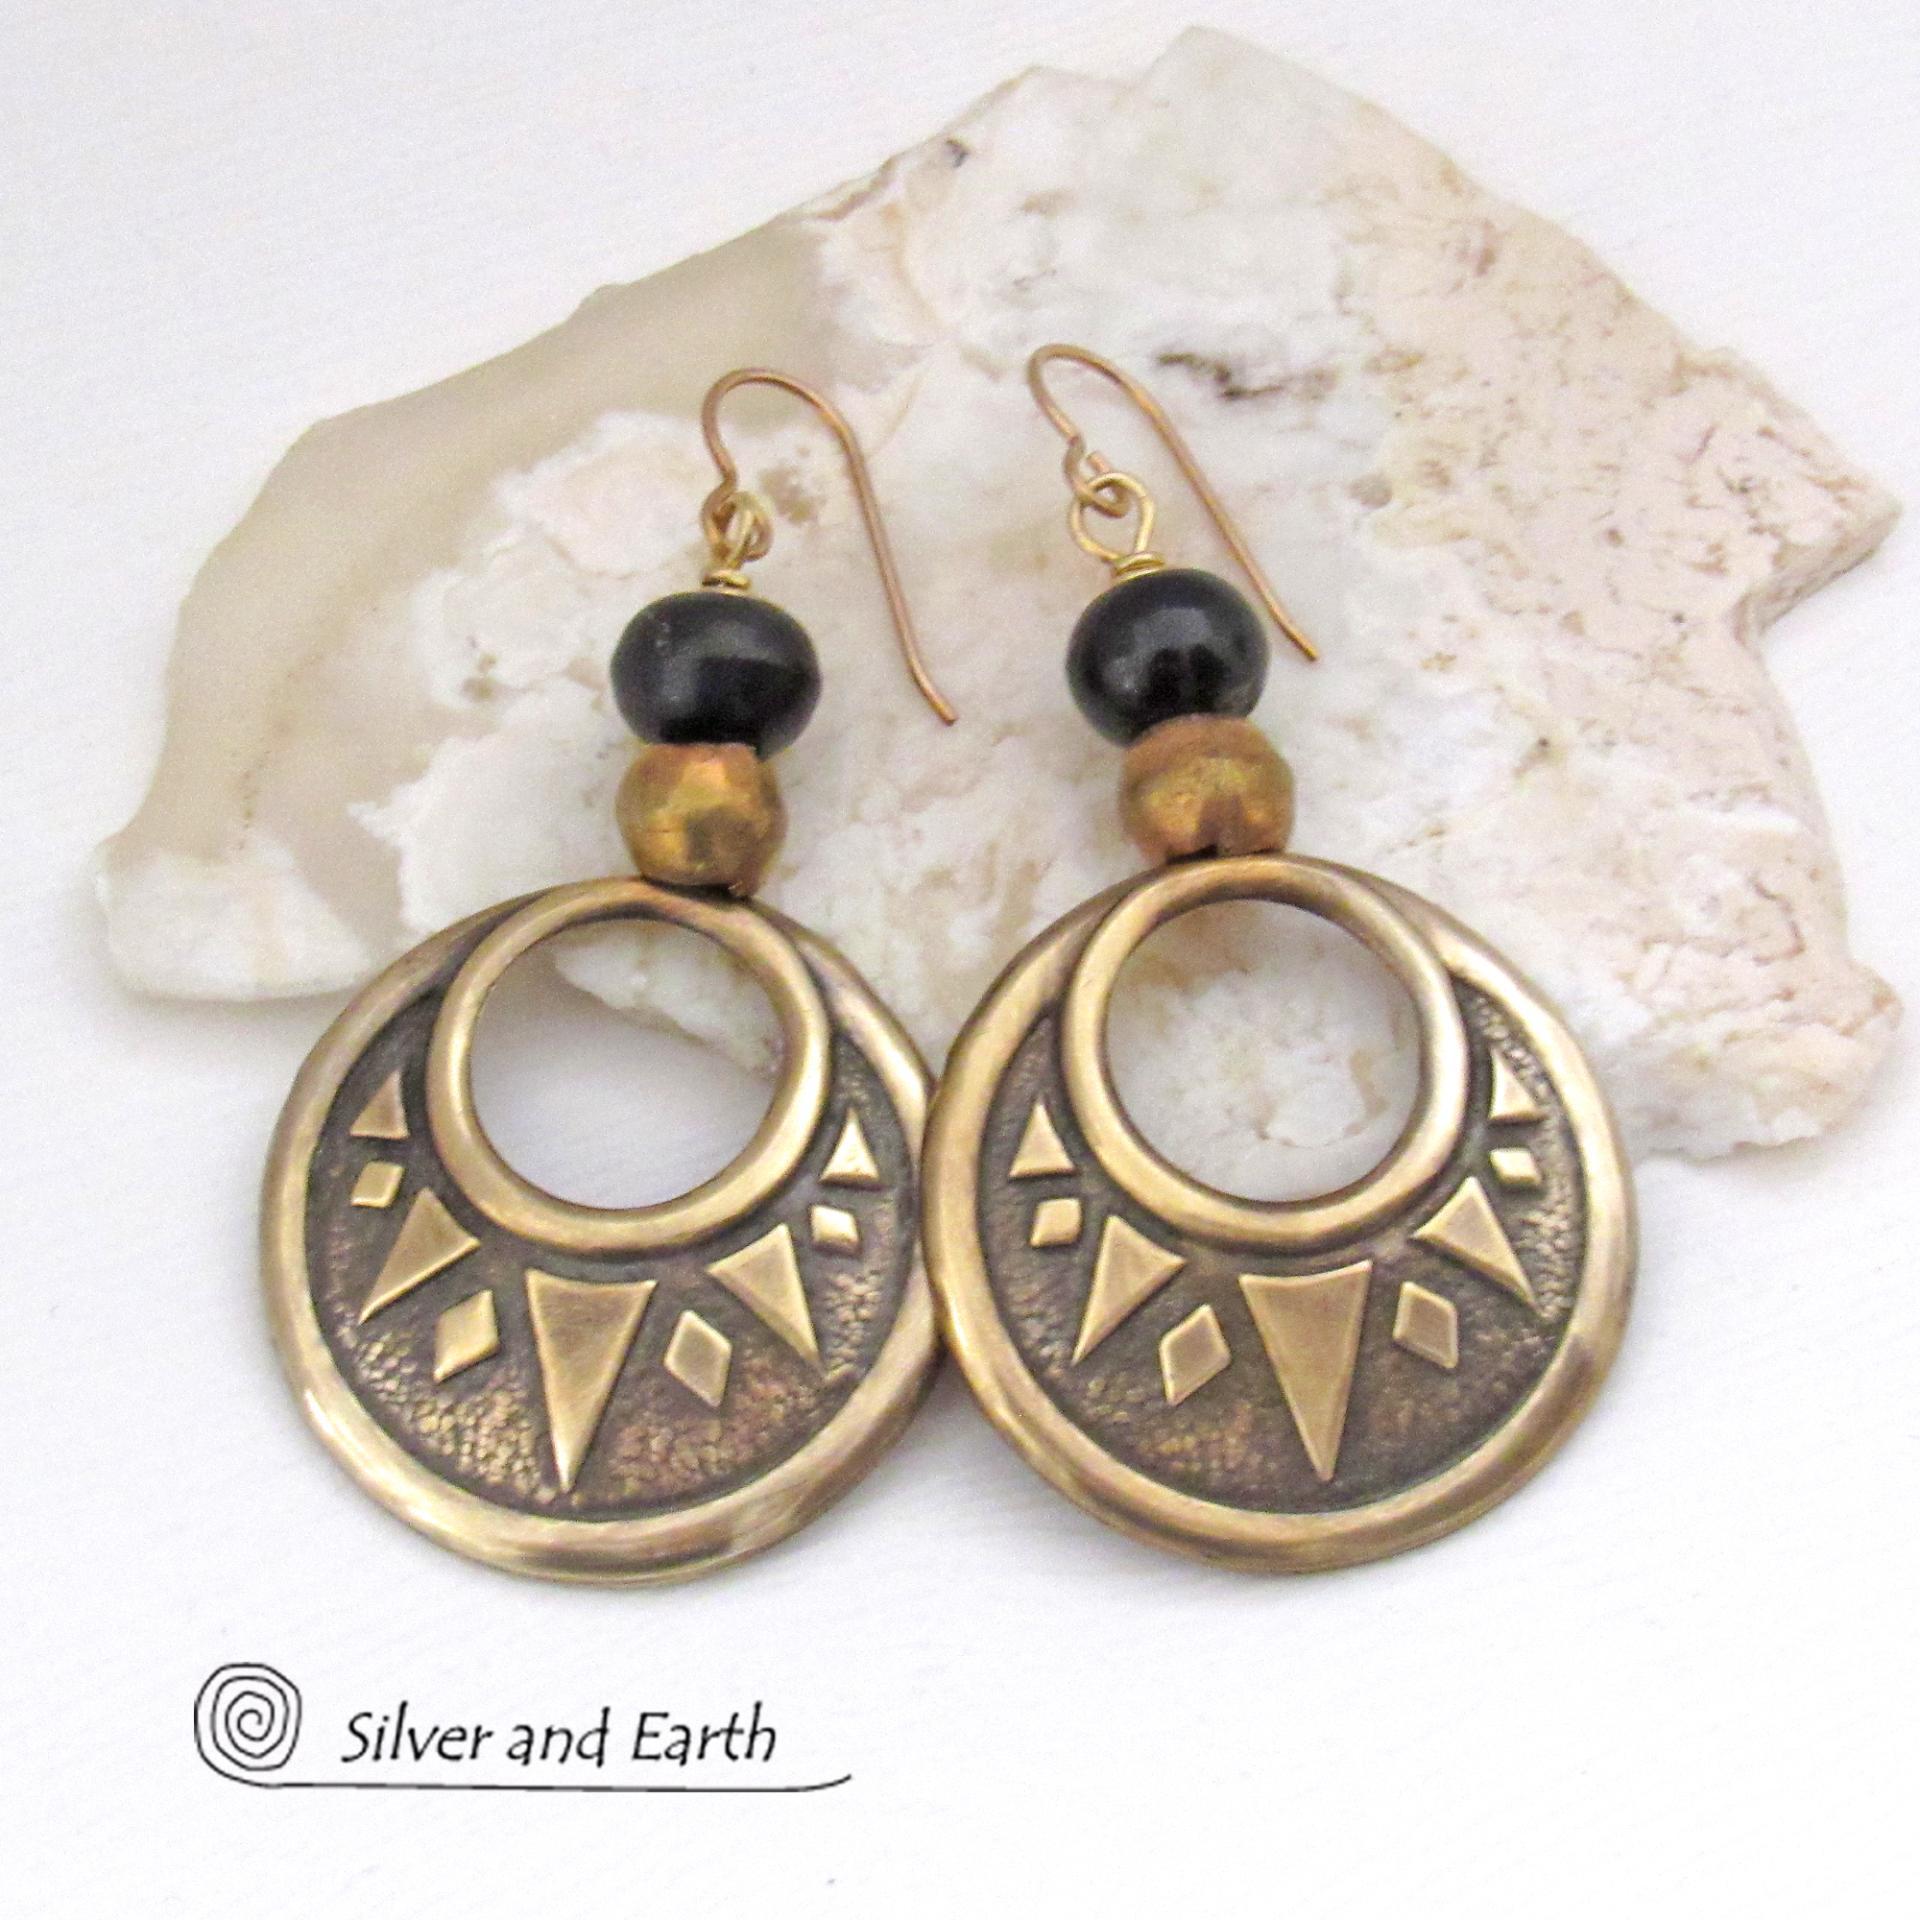 Large Brass Textured Hoop Earrings with Black and Brass Beads - Bold Ethnic Tribal Jewelry